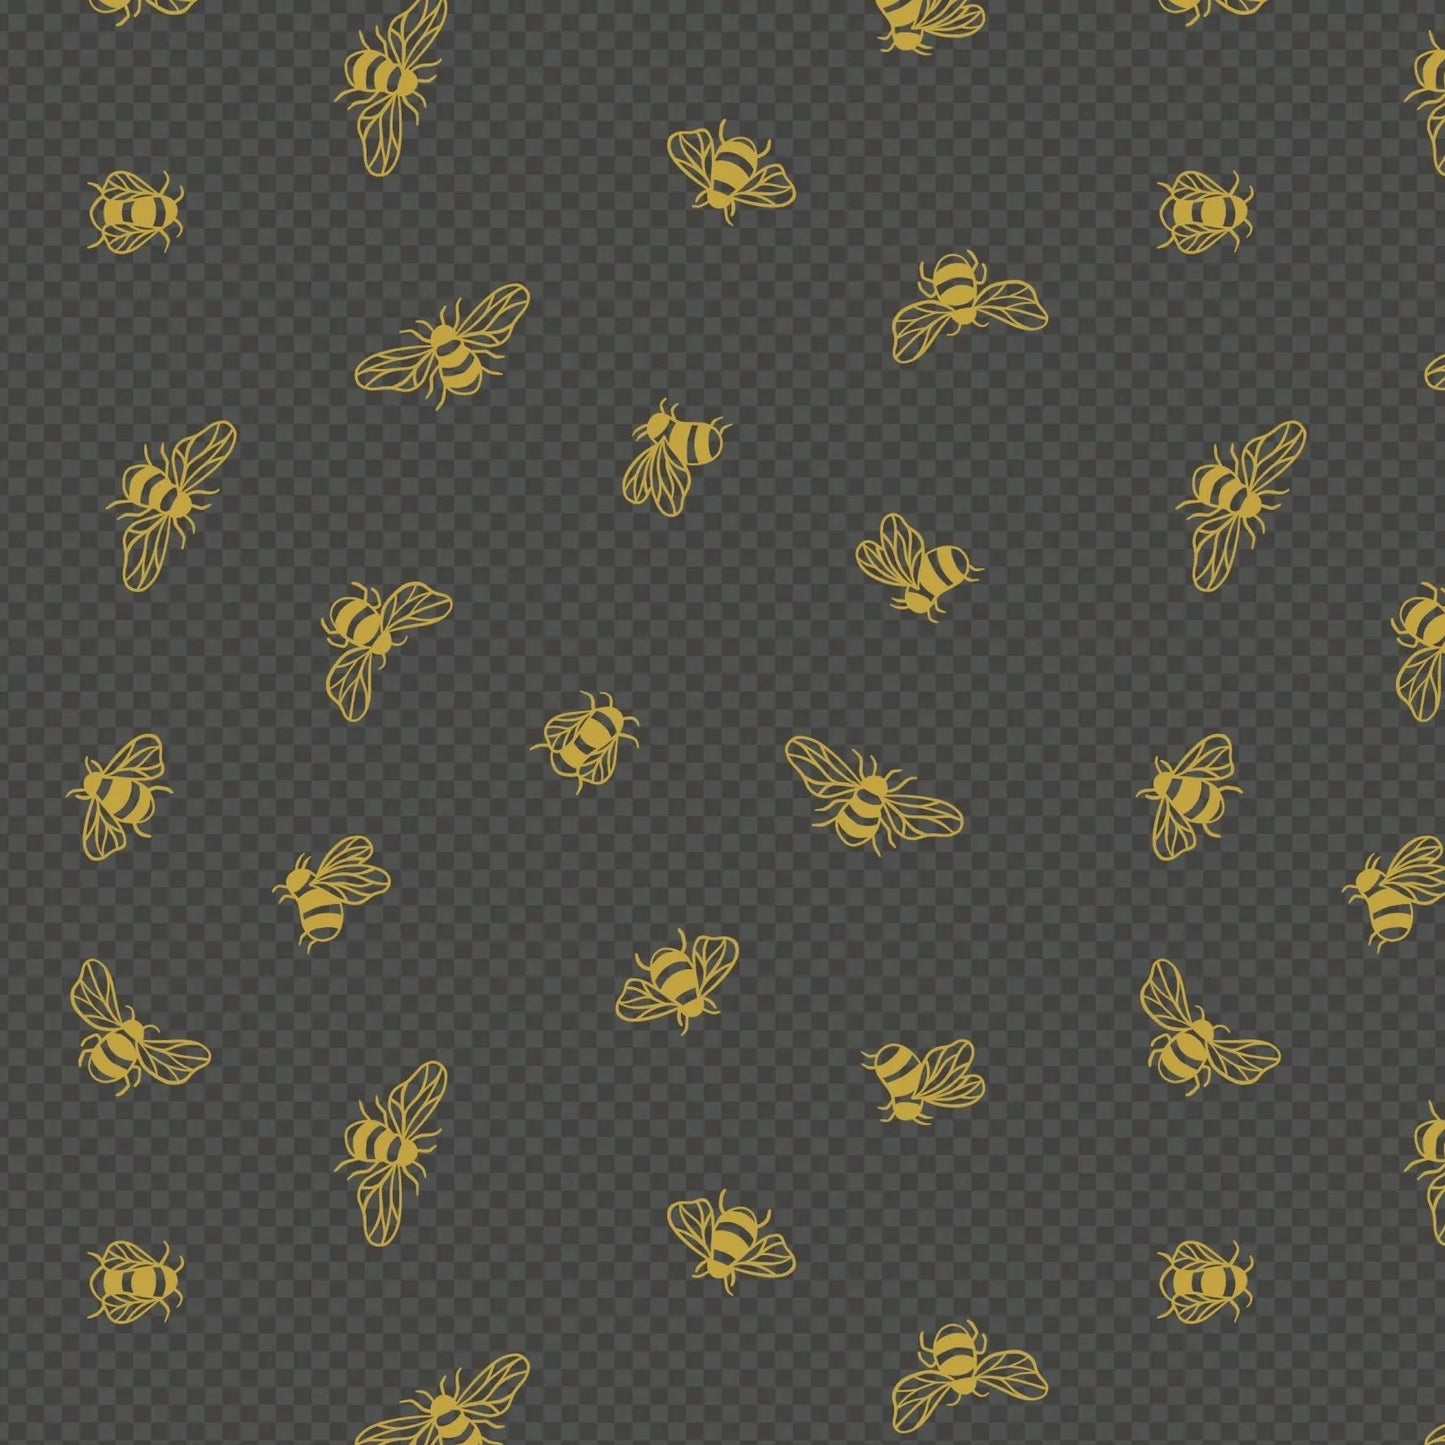 Metallic Gold Bees On Charcoal Quilting Fabric